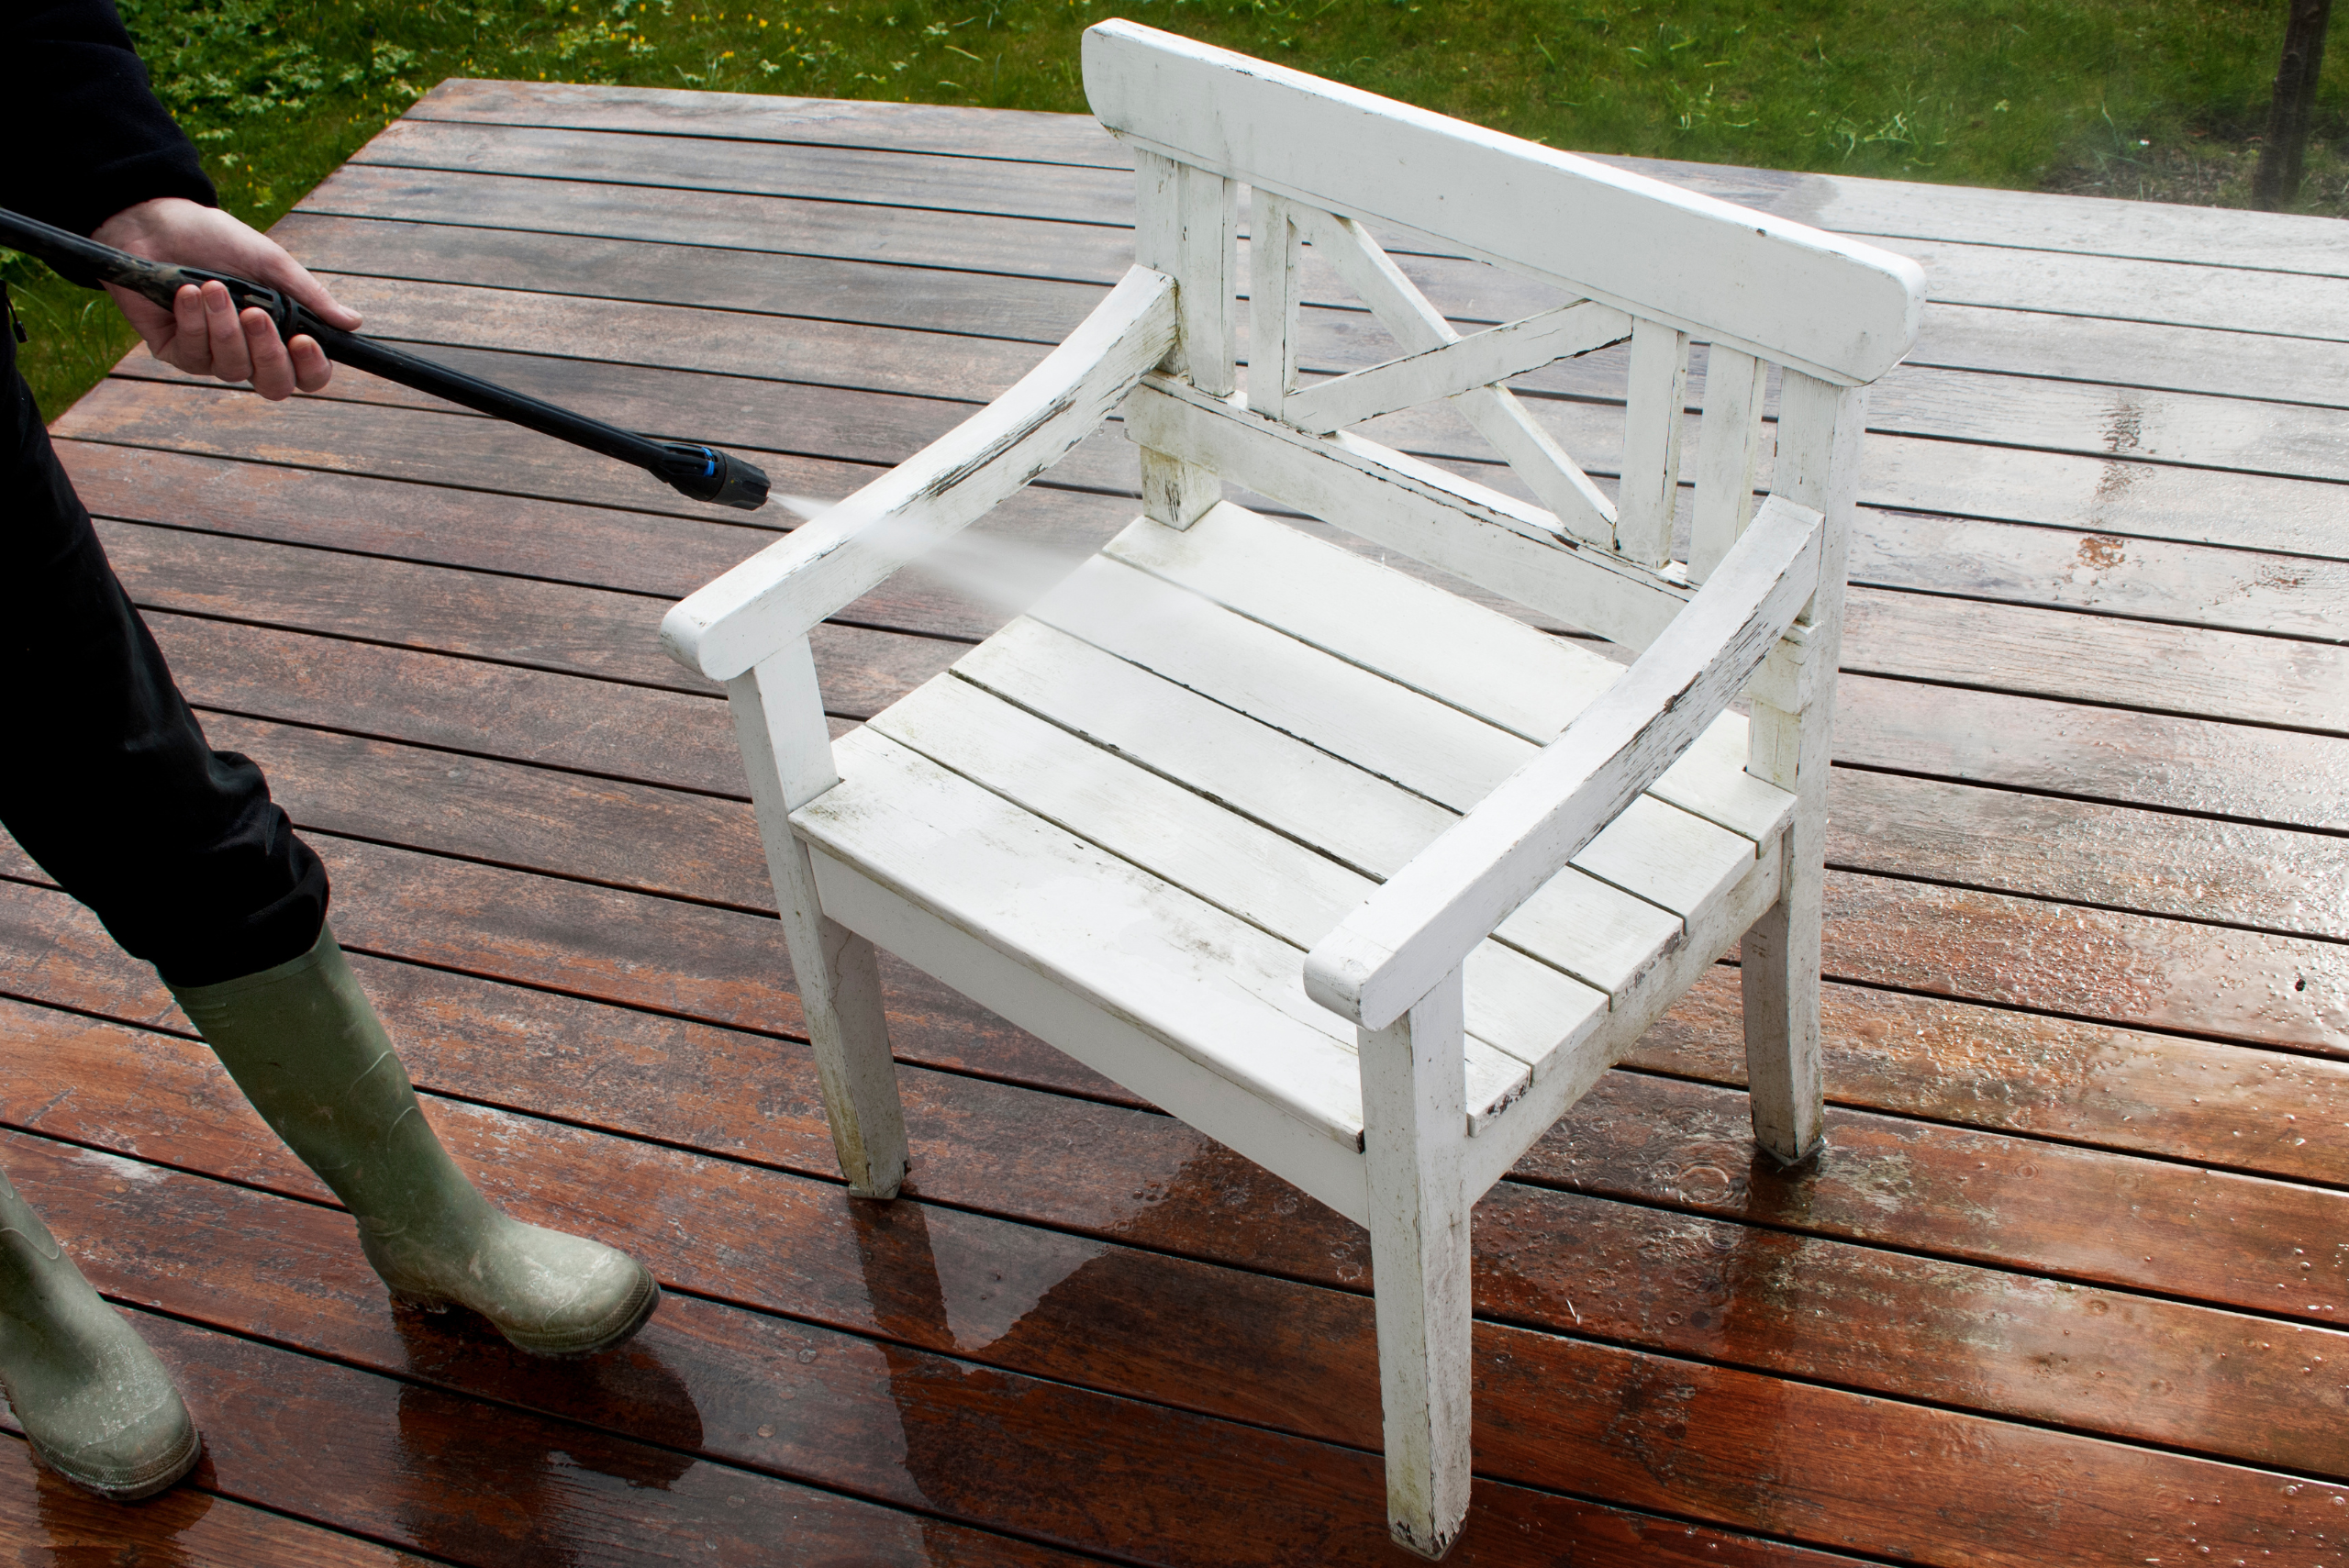 Cleaning white patio chair with pressure washer.